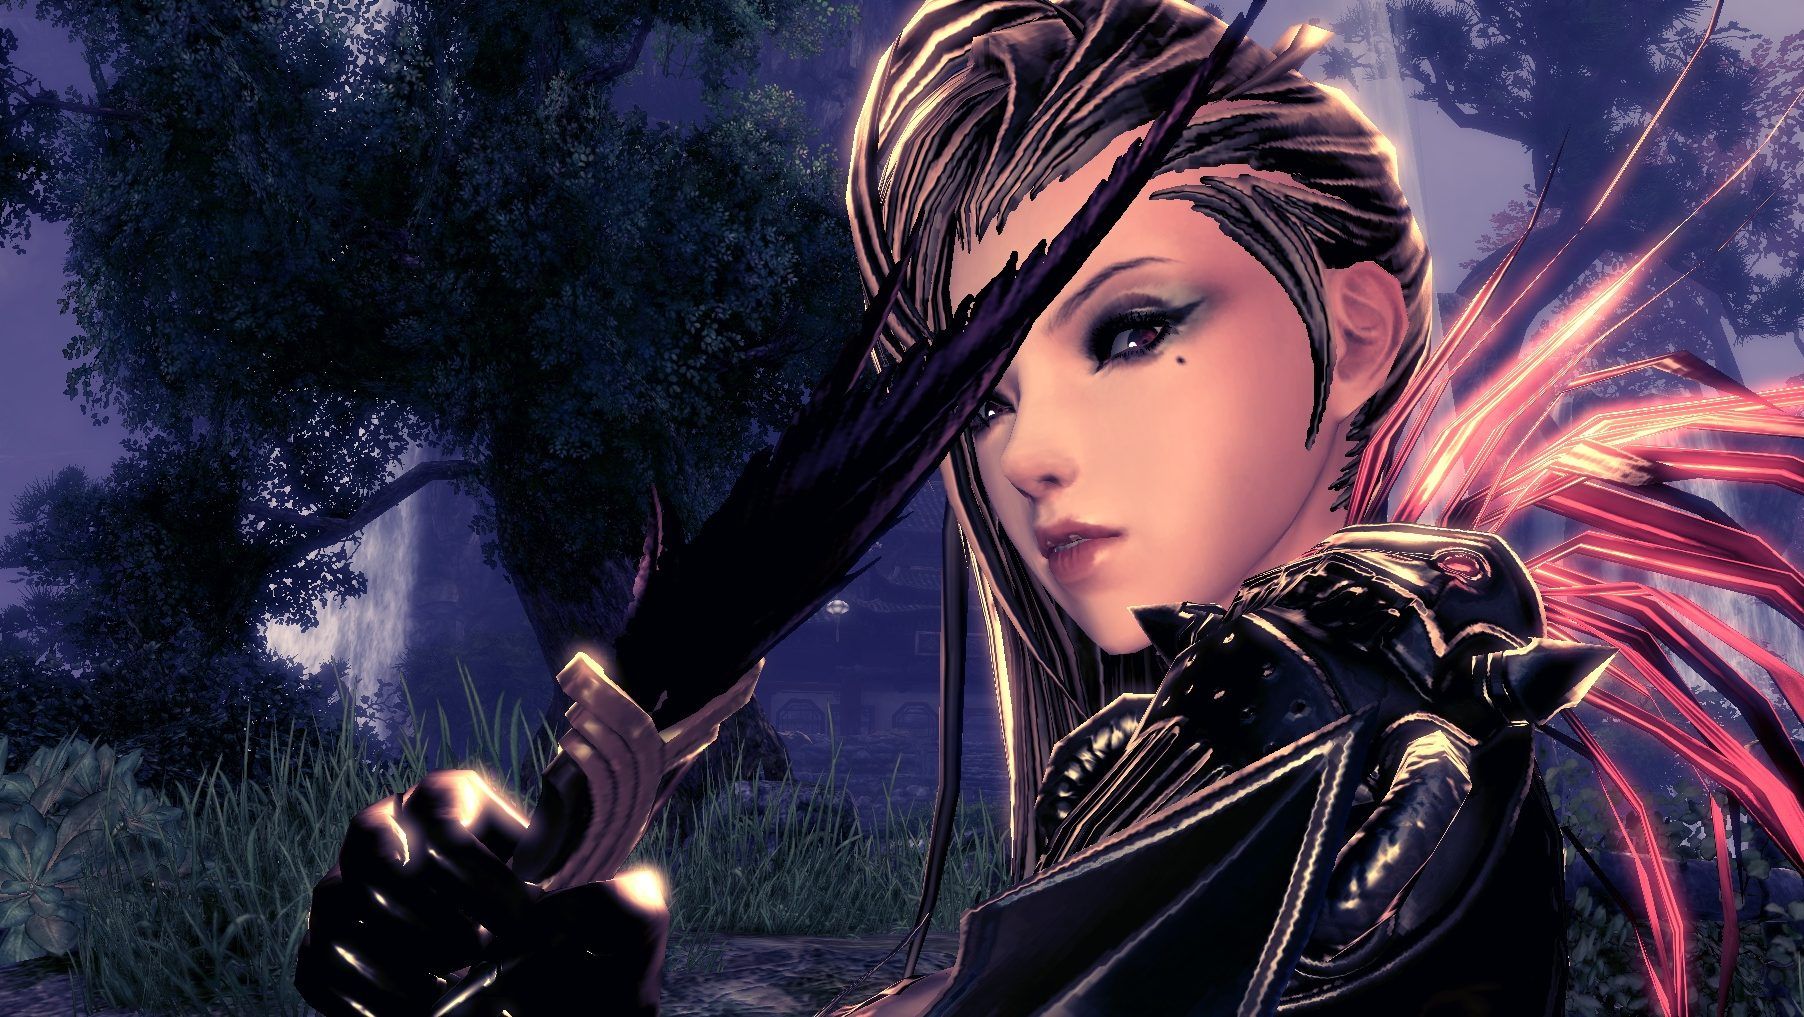 blade and soul online equipment upgrade path